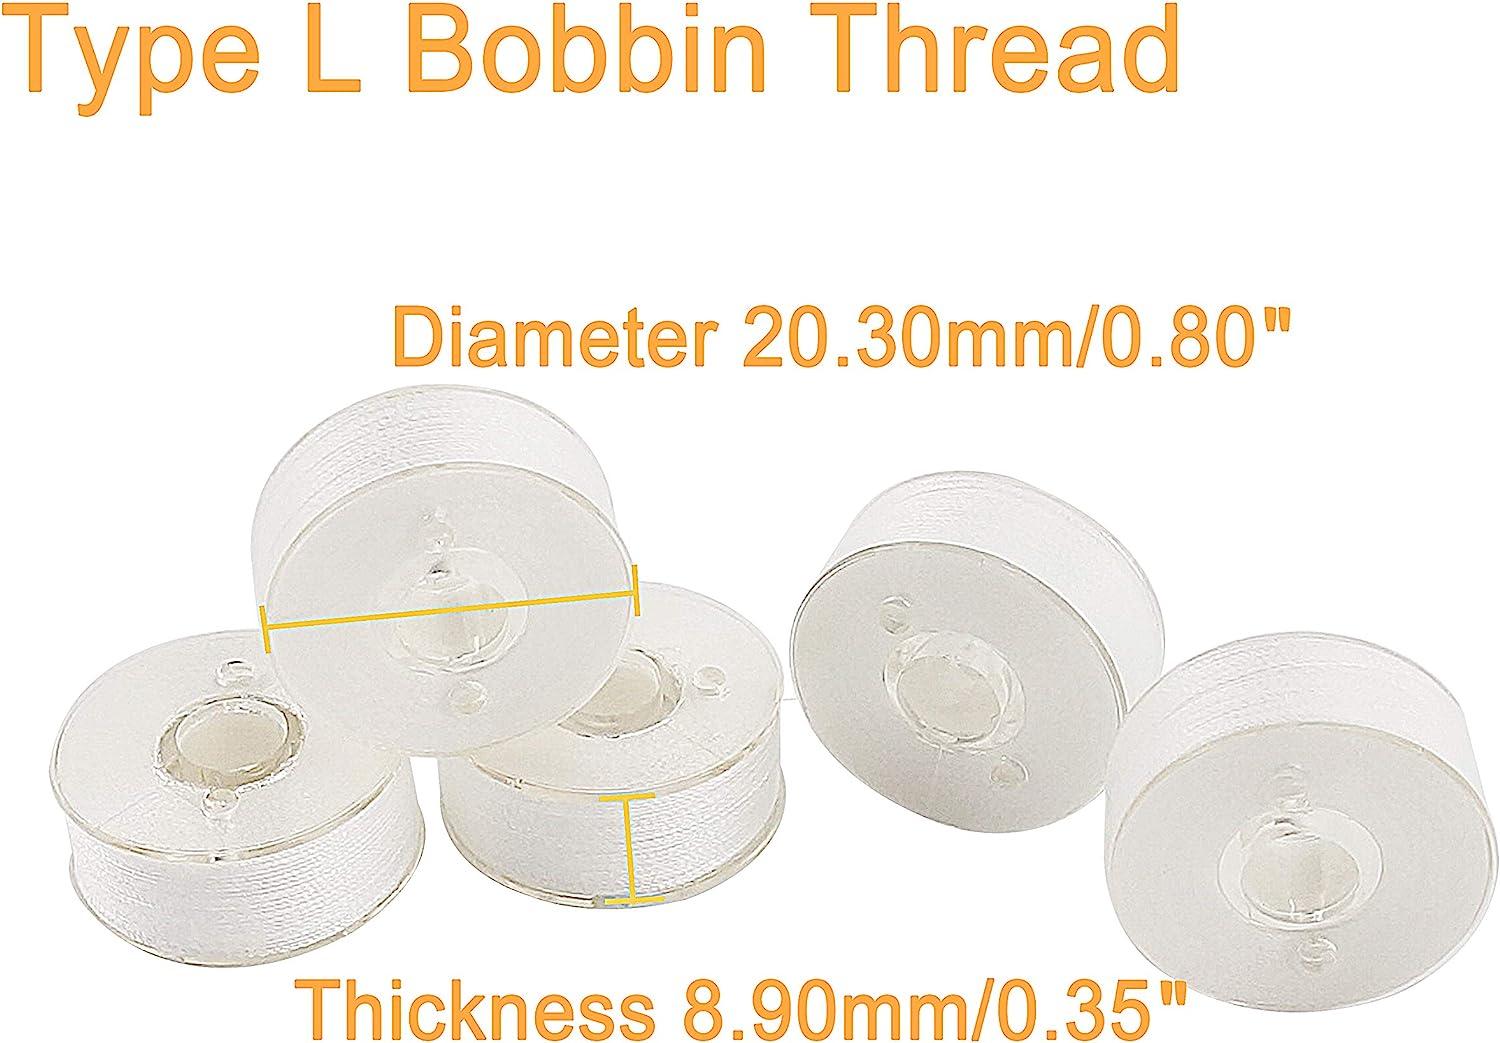 New brothread 144pcs Type L (SA155) Size White Prewound Bobbin Thread  Plastic Side for Particular Embroidery and Sewing Machines - 90 Weight  Cottonized Soft Feel Polyester Sewing Thread 144pcs 90wt White